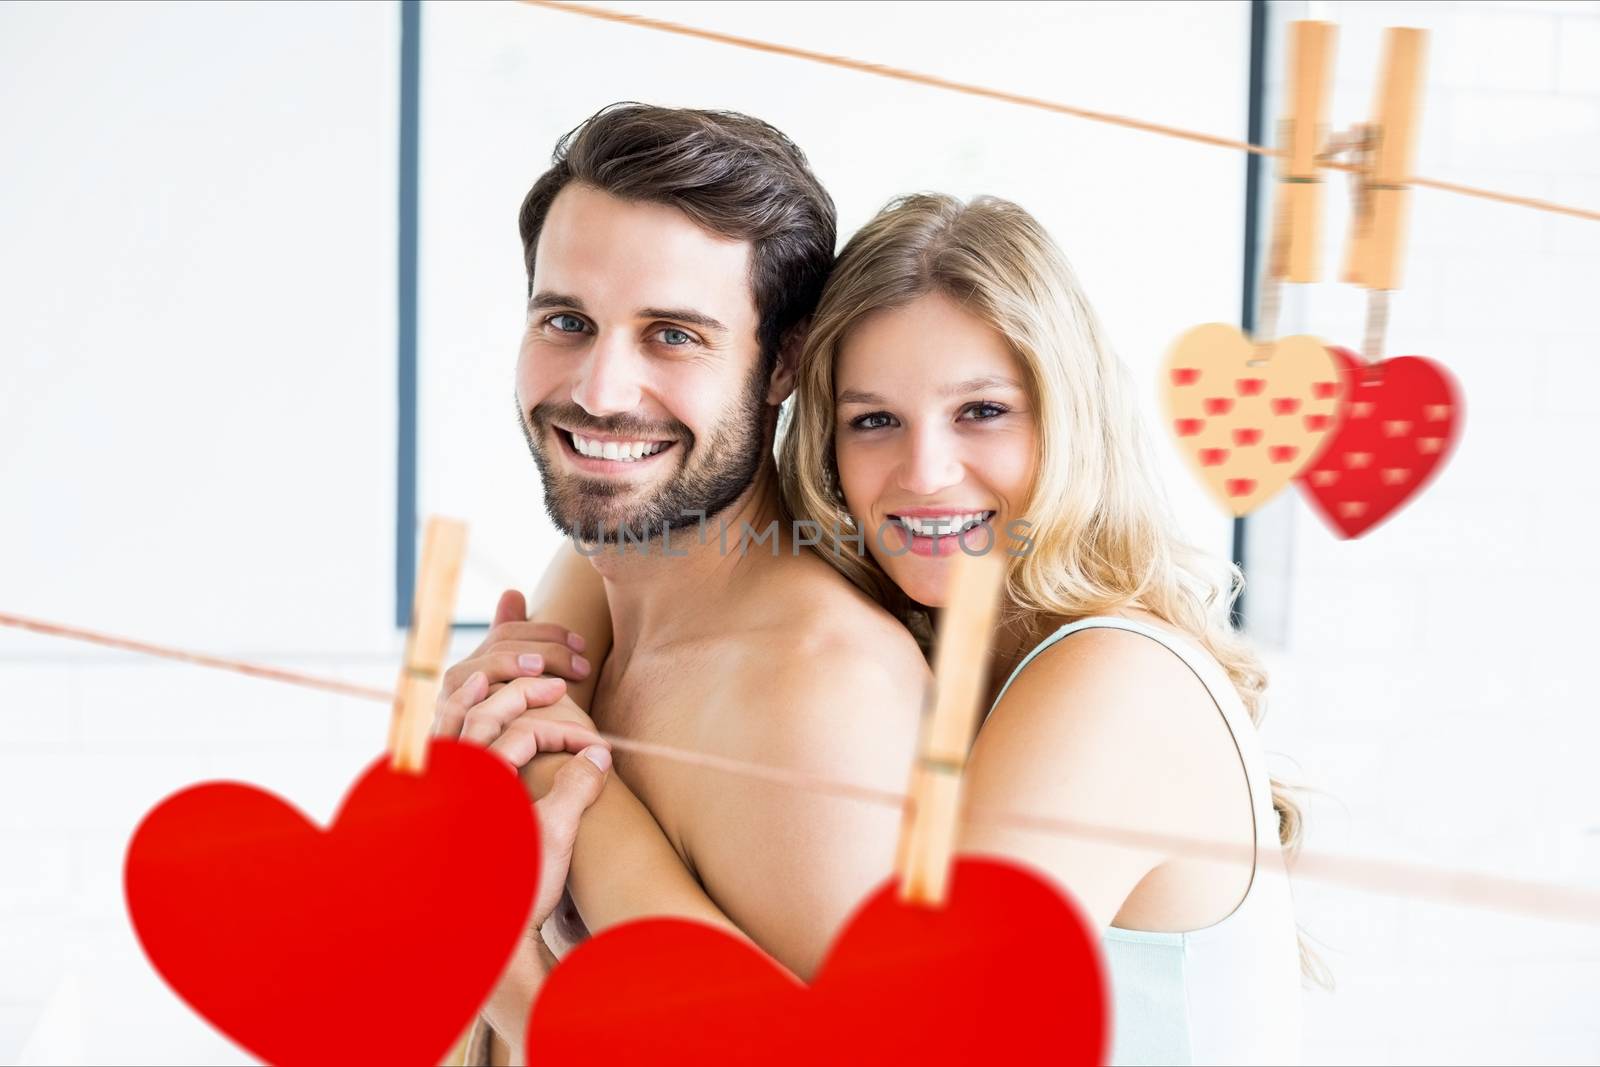 Composite image of romantic couple embracing by Wavebreakmedia